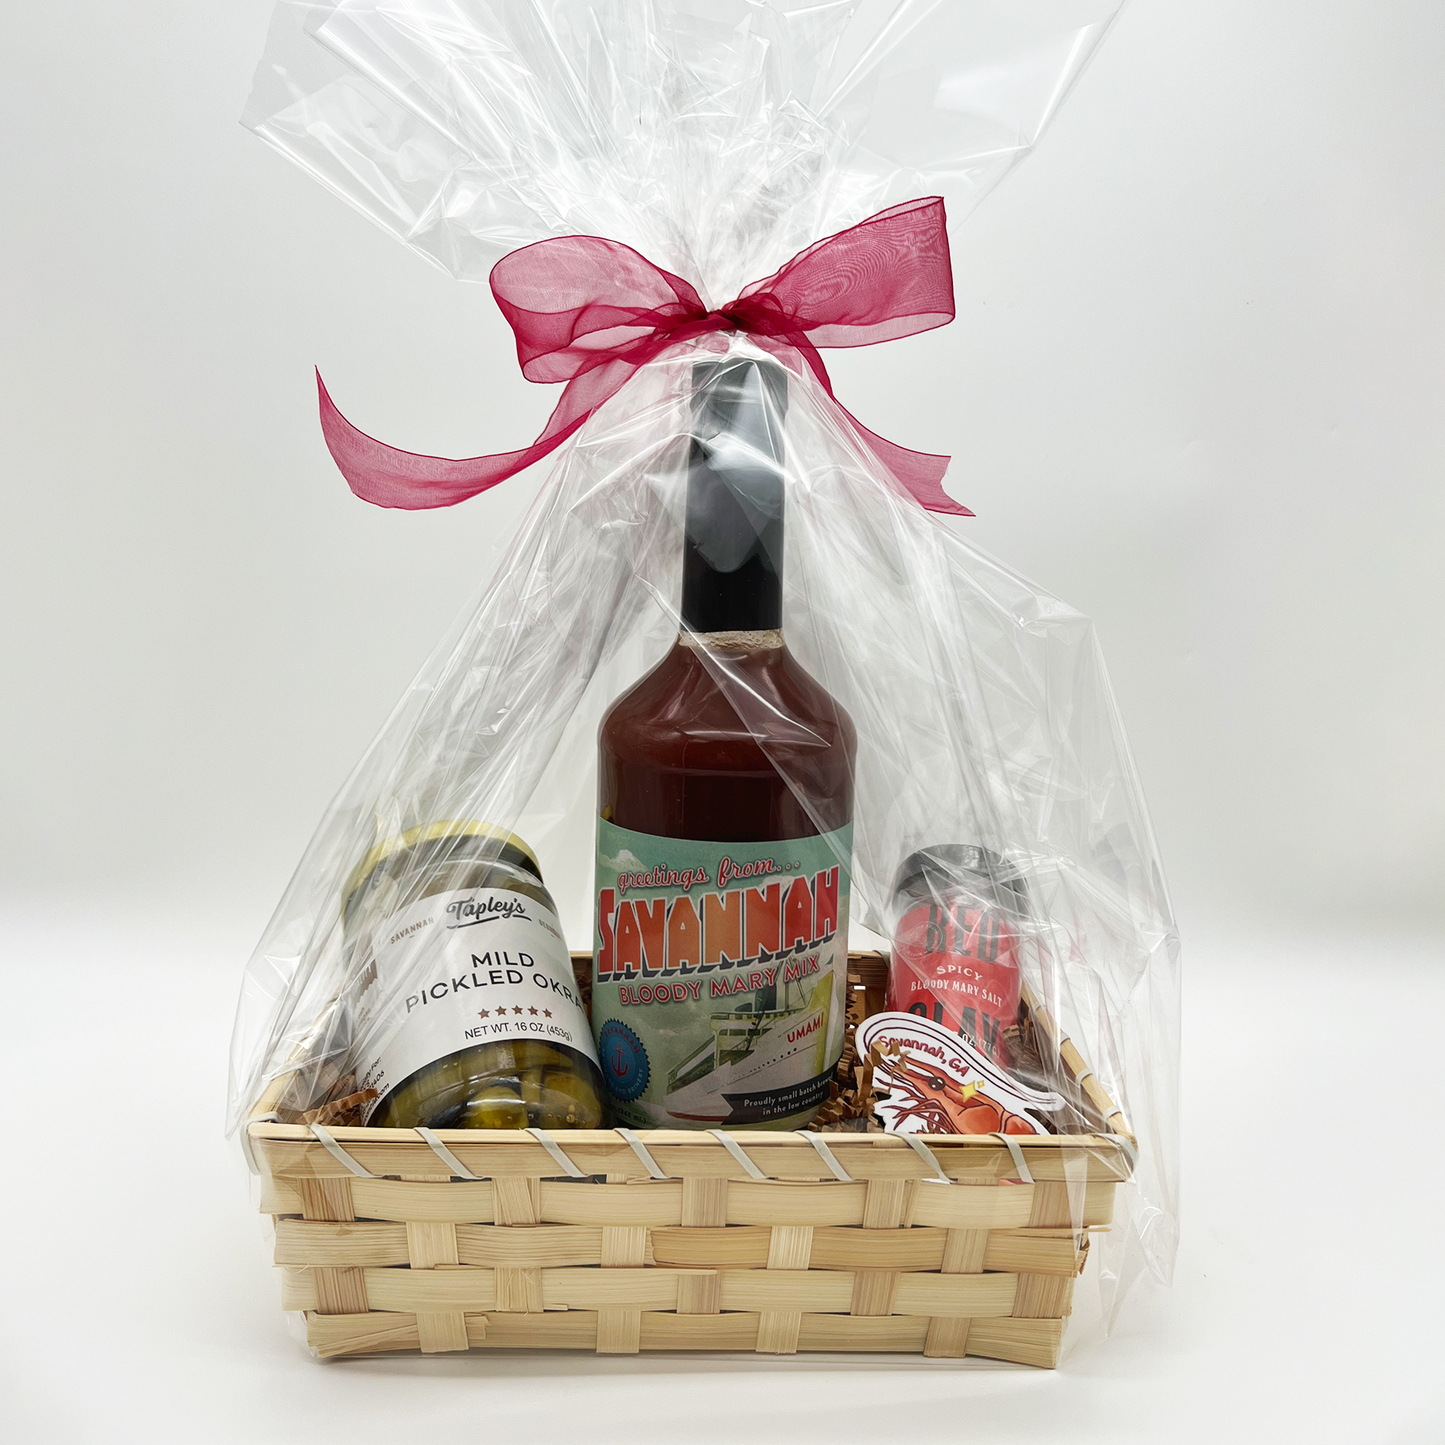 Southern Bloody Mary Gift Set